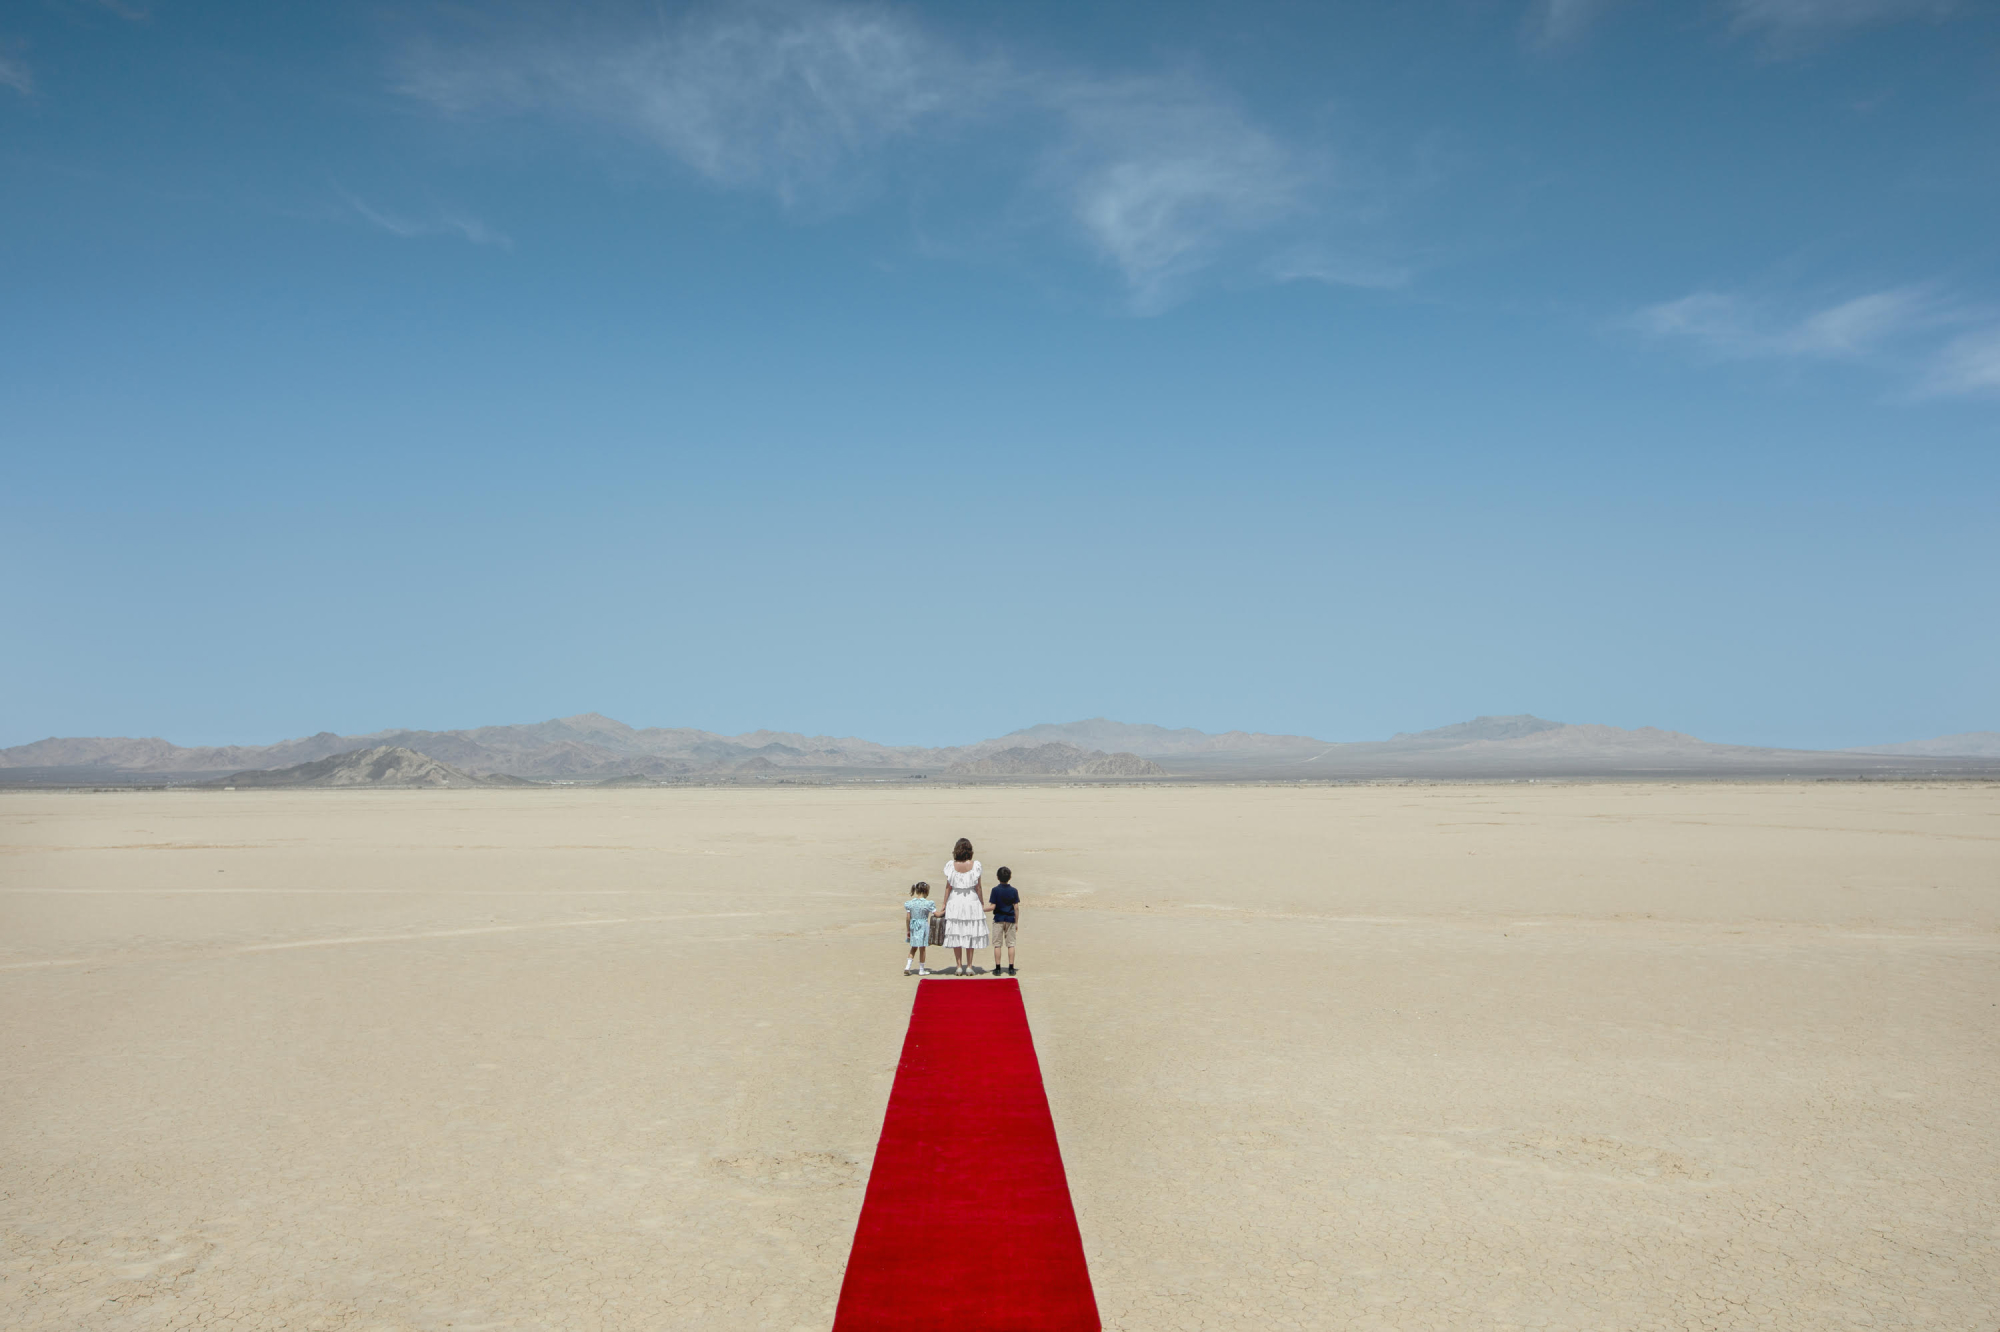 Expansive desert vista with a single red carpet stretching into the distance, and three figures standing at the edge of the carpet.